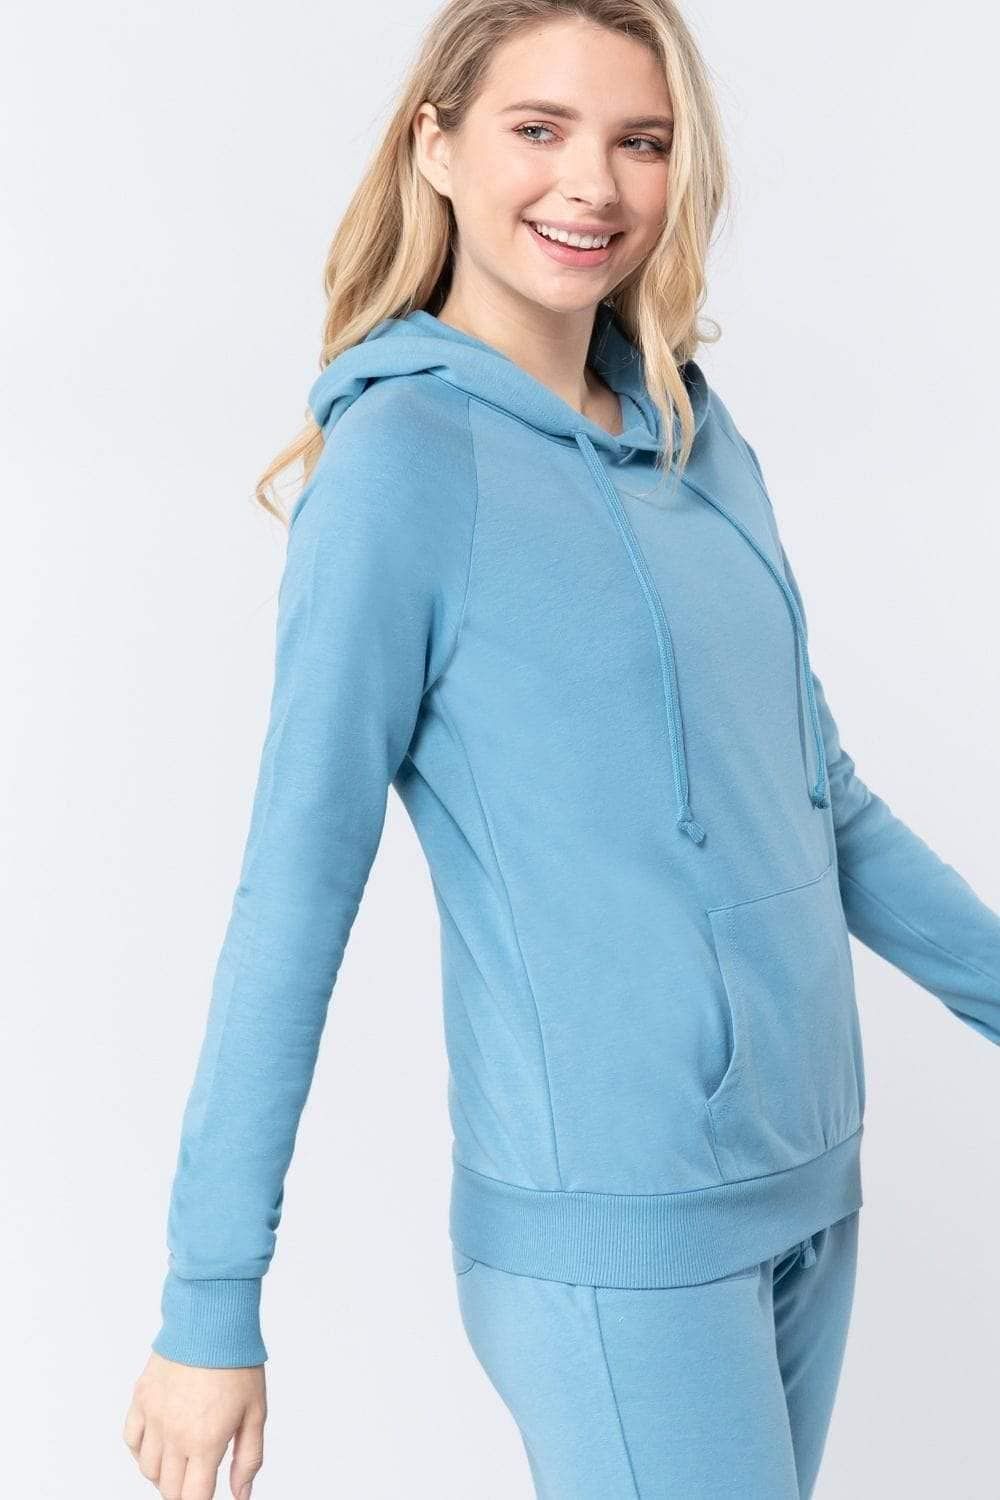 Topaz Long Sleeve French Terry Hooded Sweater - Shopping Therapy M Sweatshirt